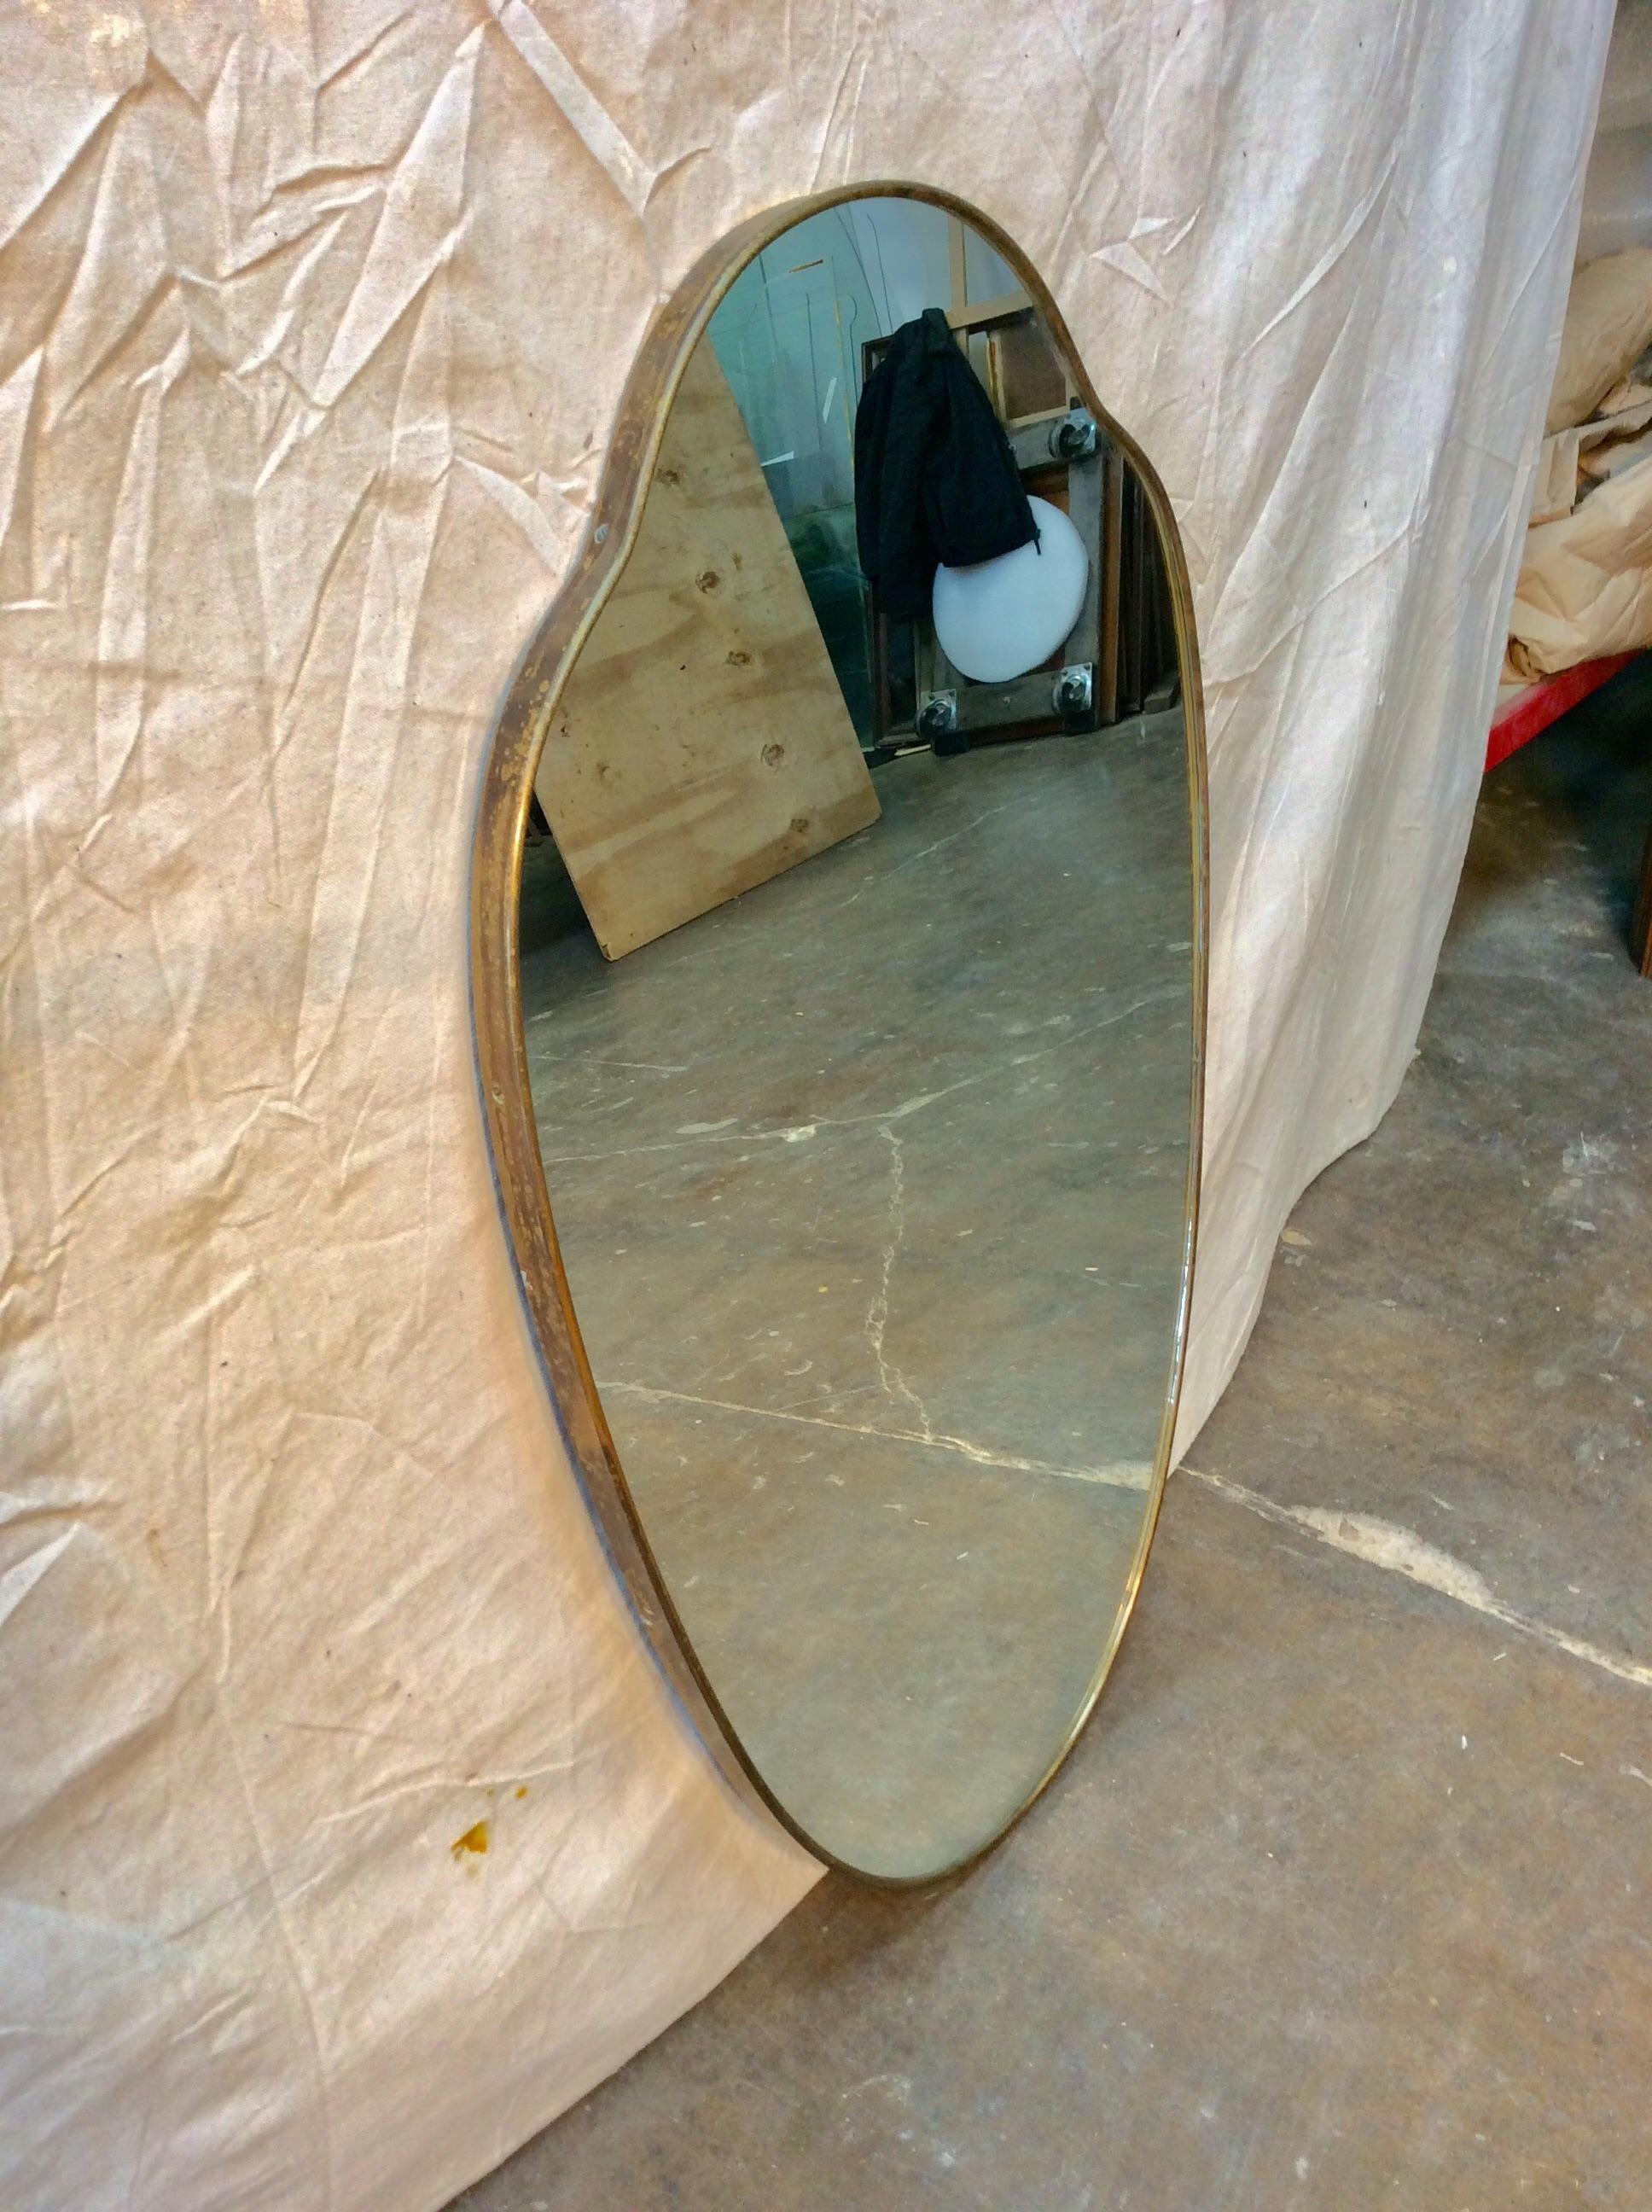 Found in Italy this Mid-20th Century Italian Brass Mirror has a beautiful shield shape and a brass frame. The aged brass frame has a lovely patina but could be polished to sparkle. The piece is in good condition with minor mirror loss and ready to